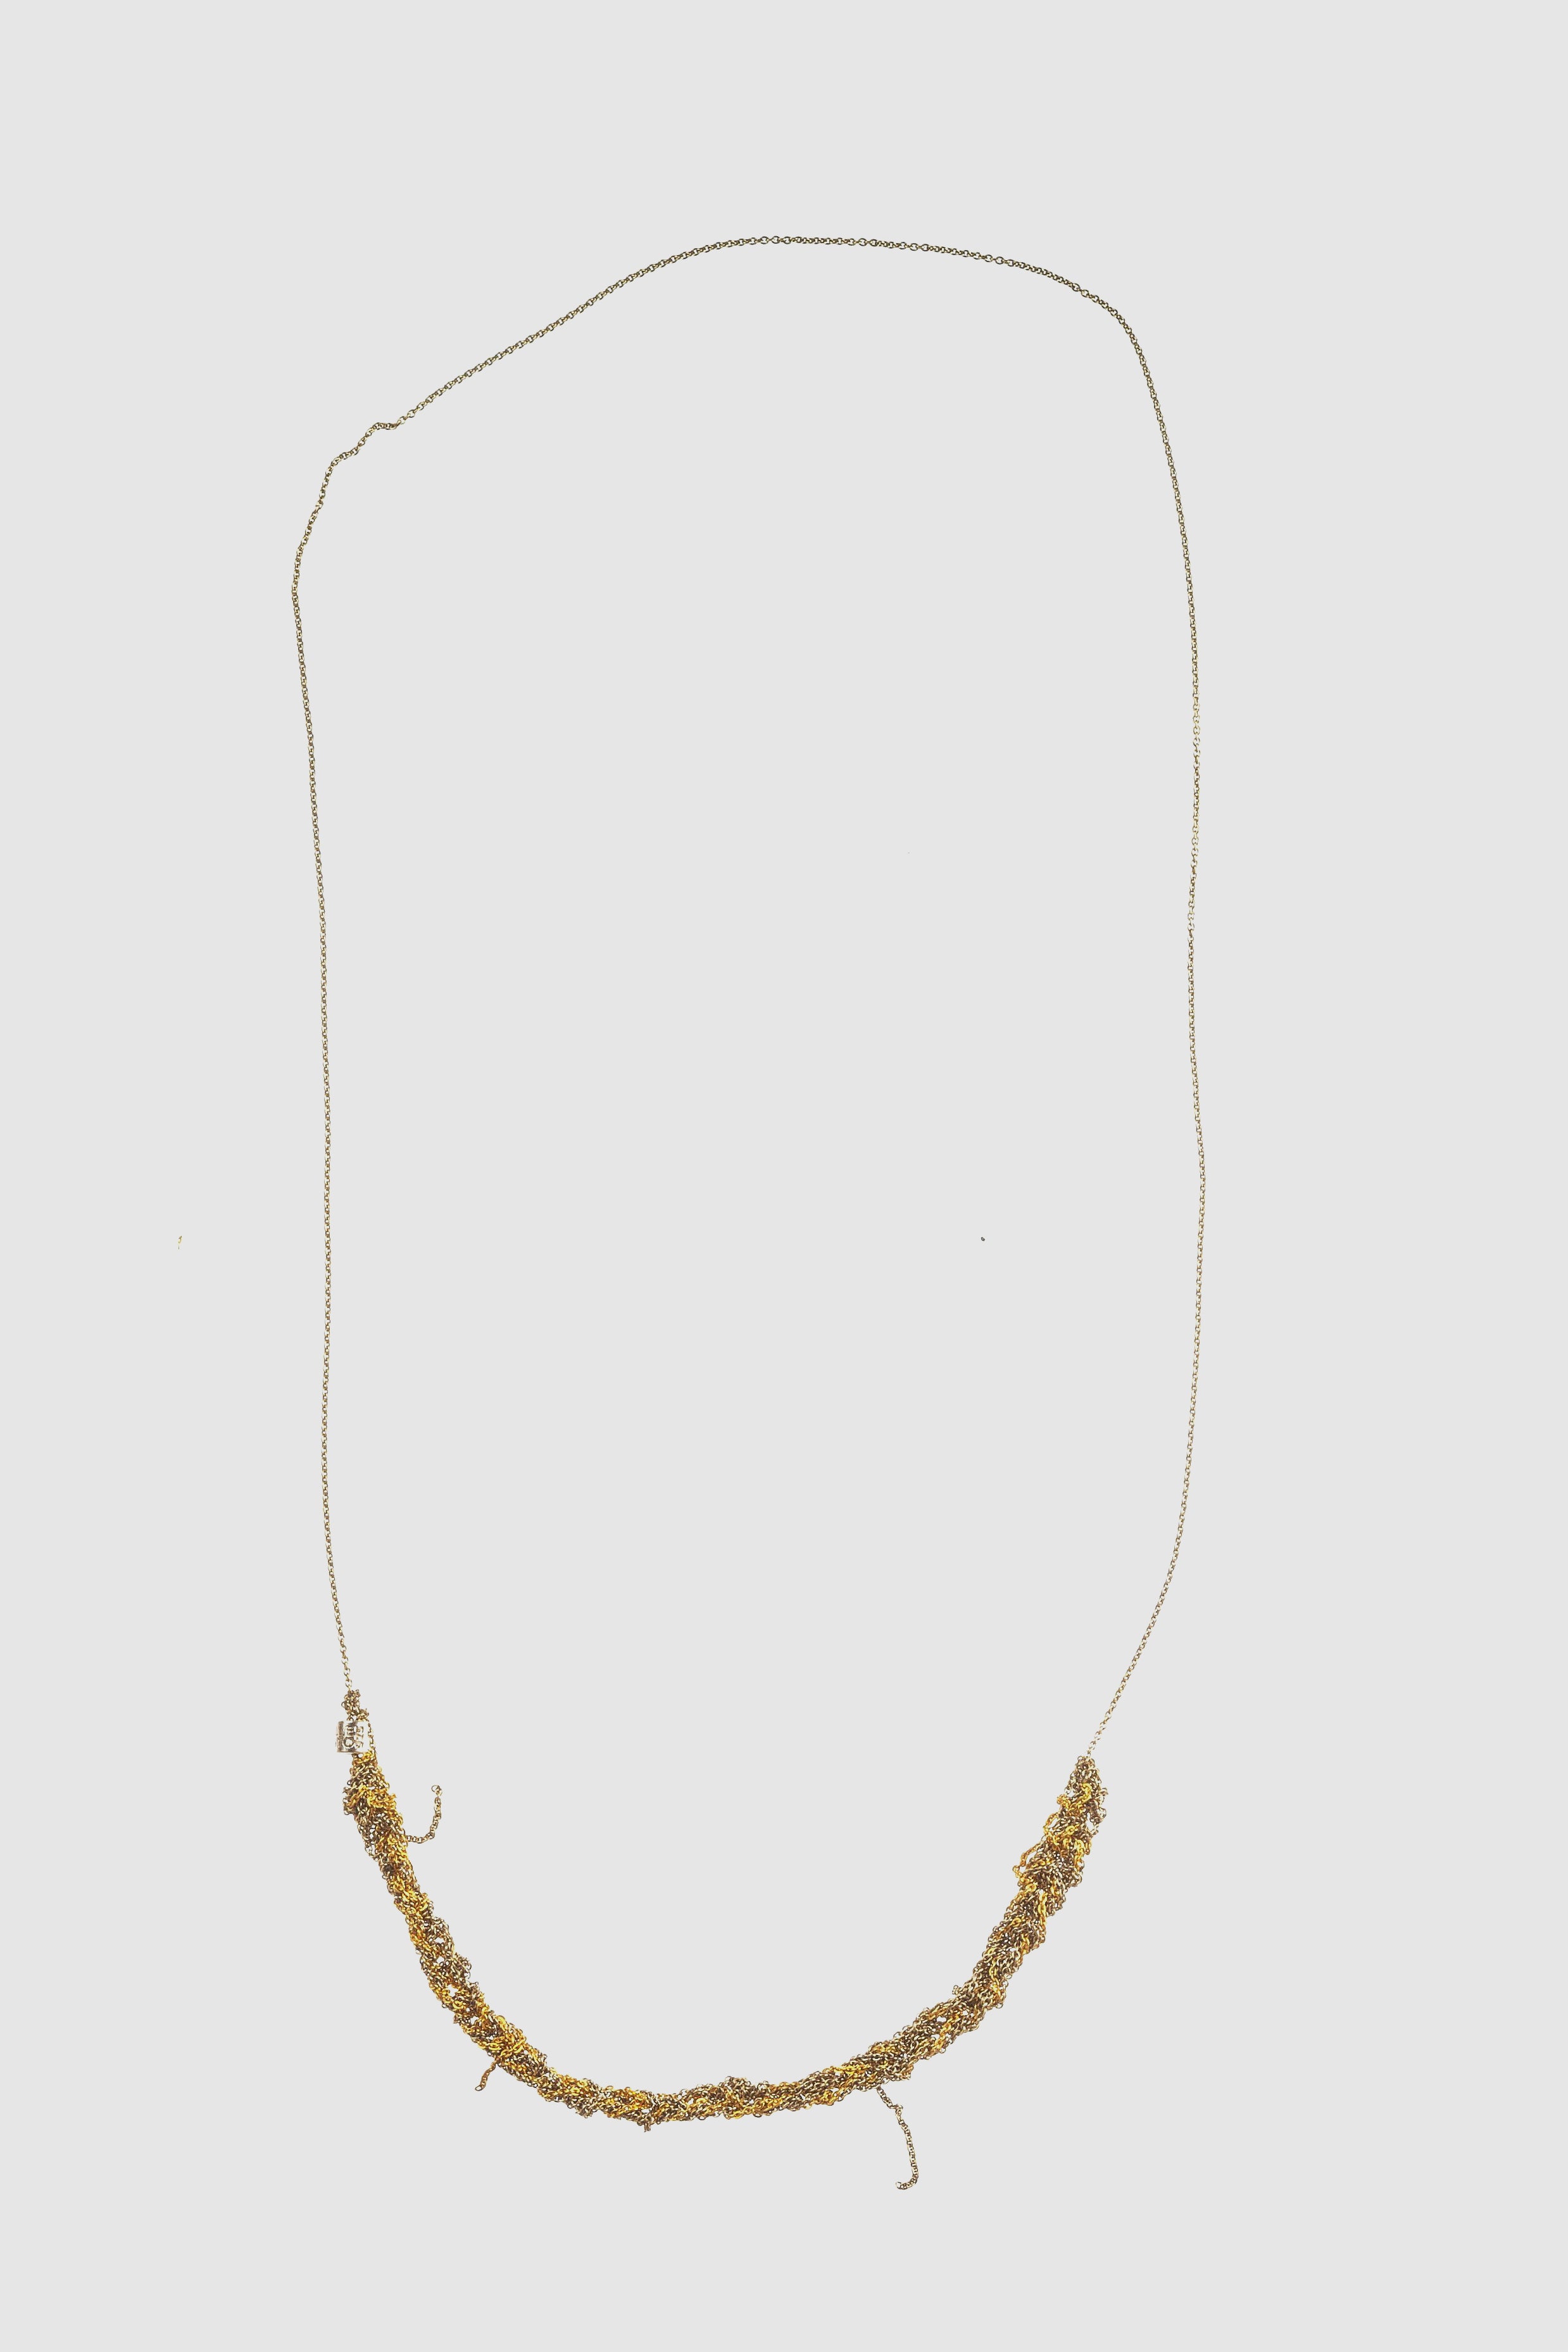 Arielle De Pinto The Skinny Necklace In Haze And Gold